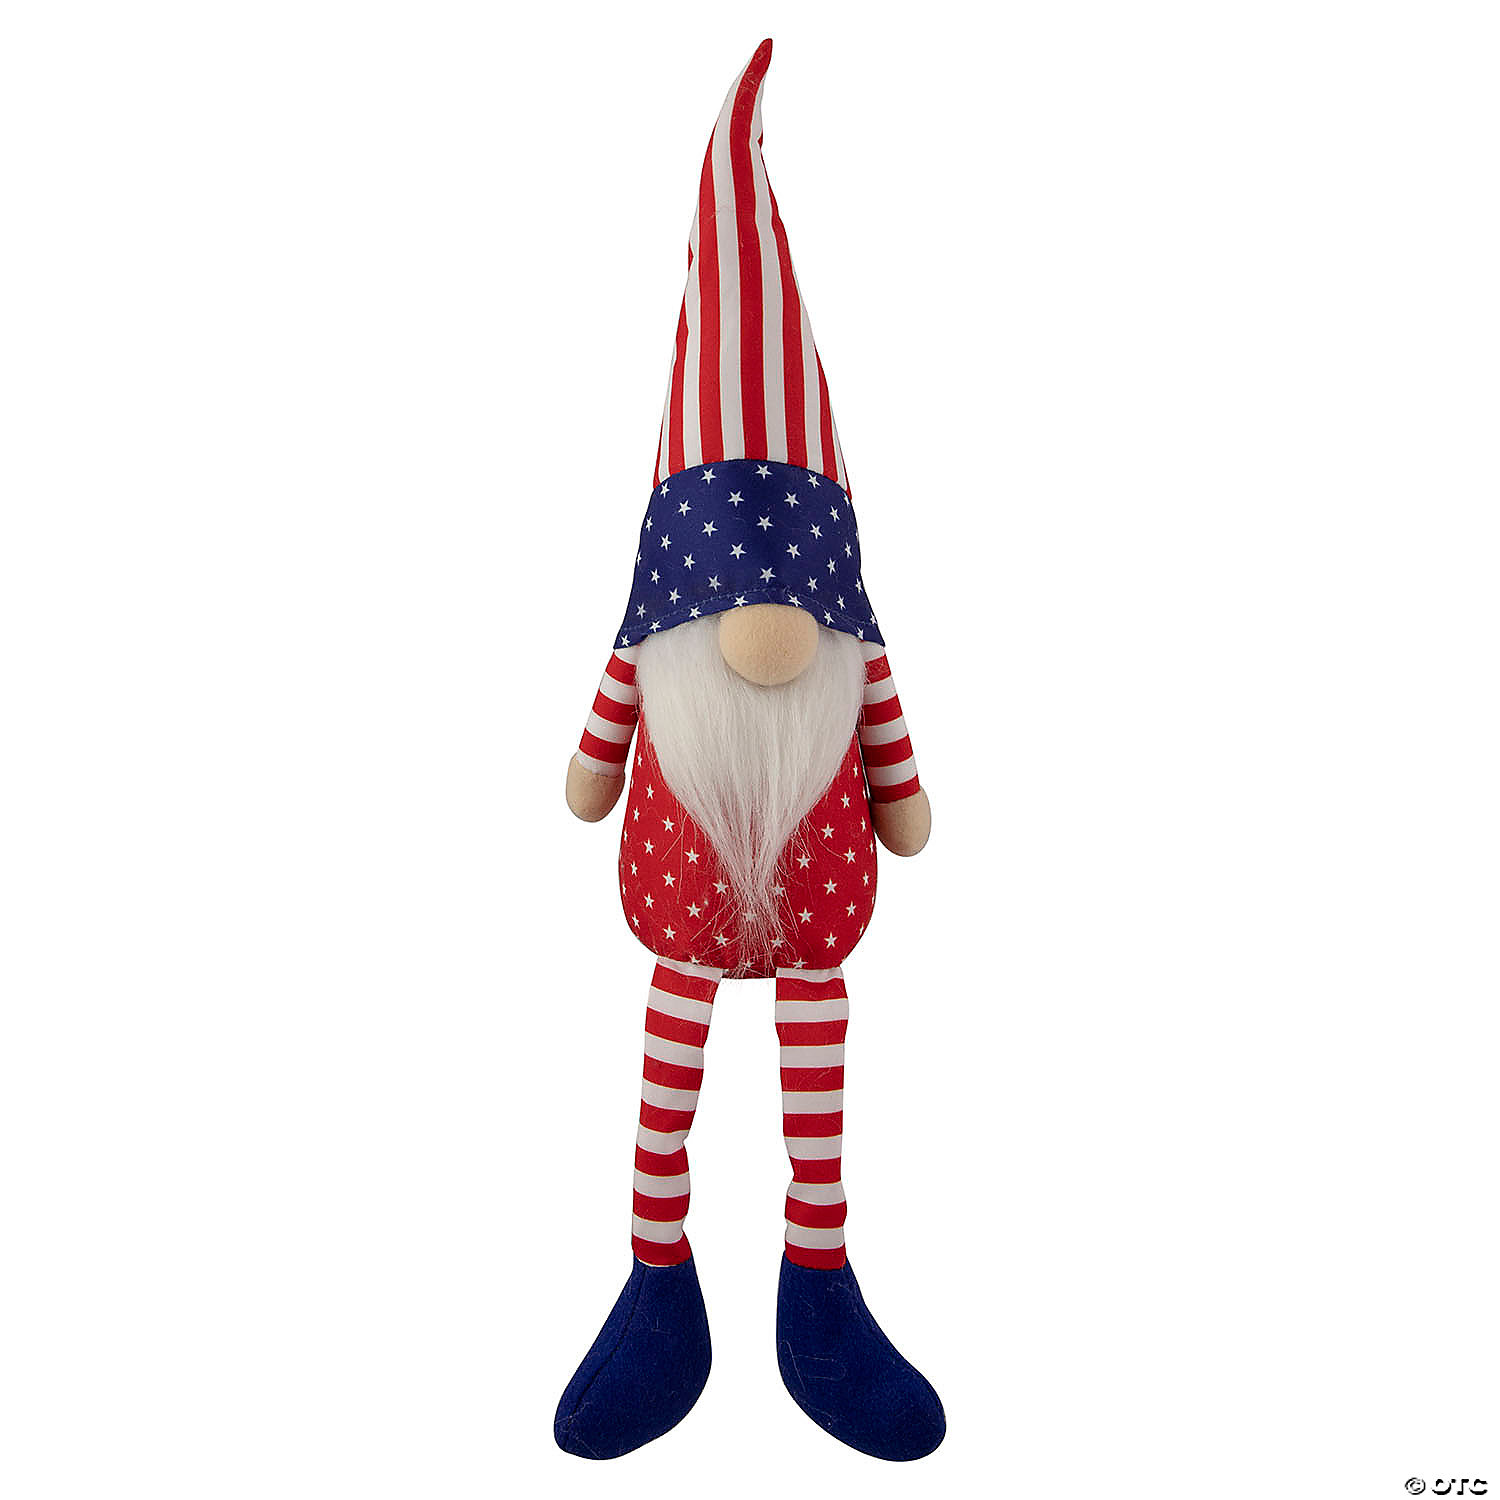 Patriotic 4th of July Mini Gnomes Set of 3 Red White and Blue Boys